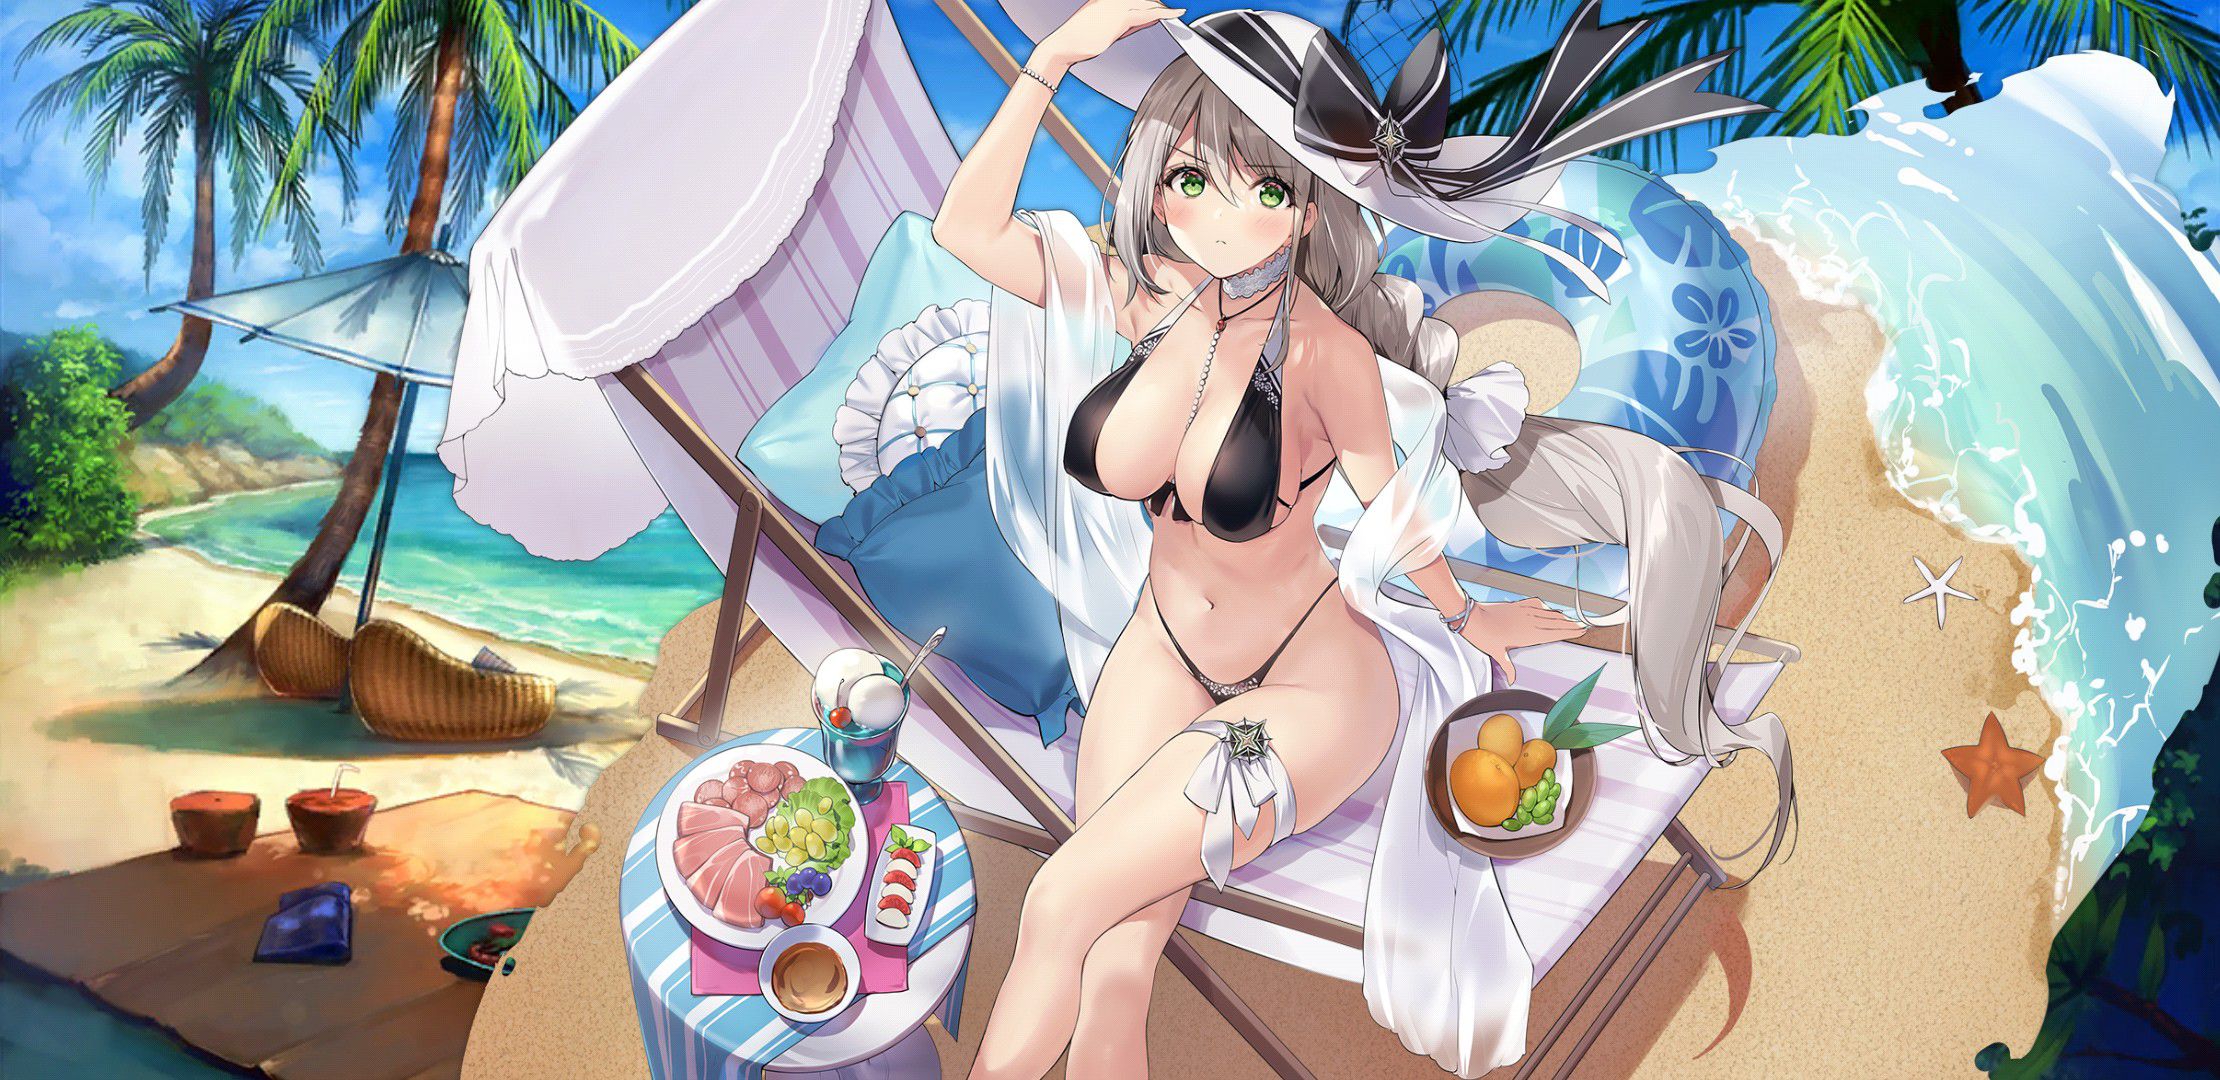 【There is an image】 Smartphone that urges charging with erotic swimsuits is malicious 34